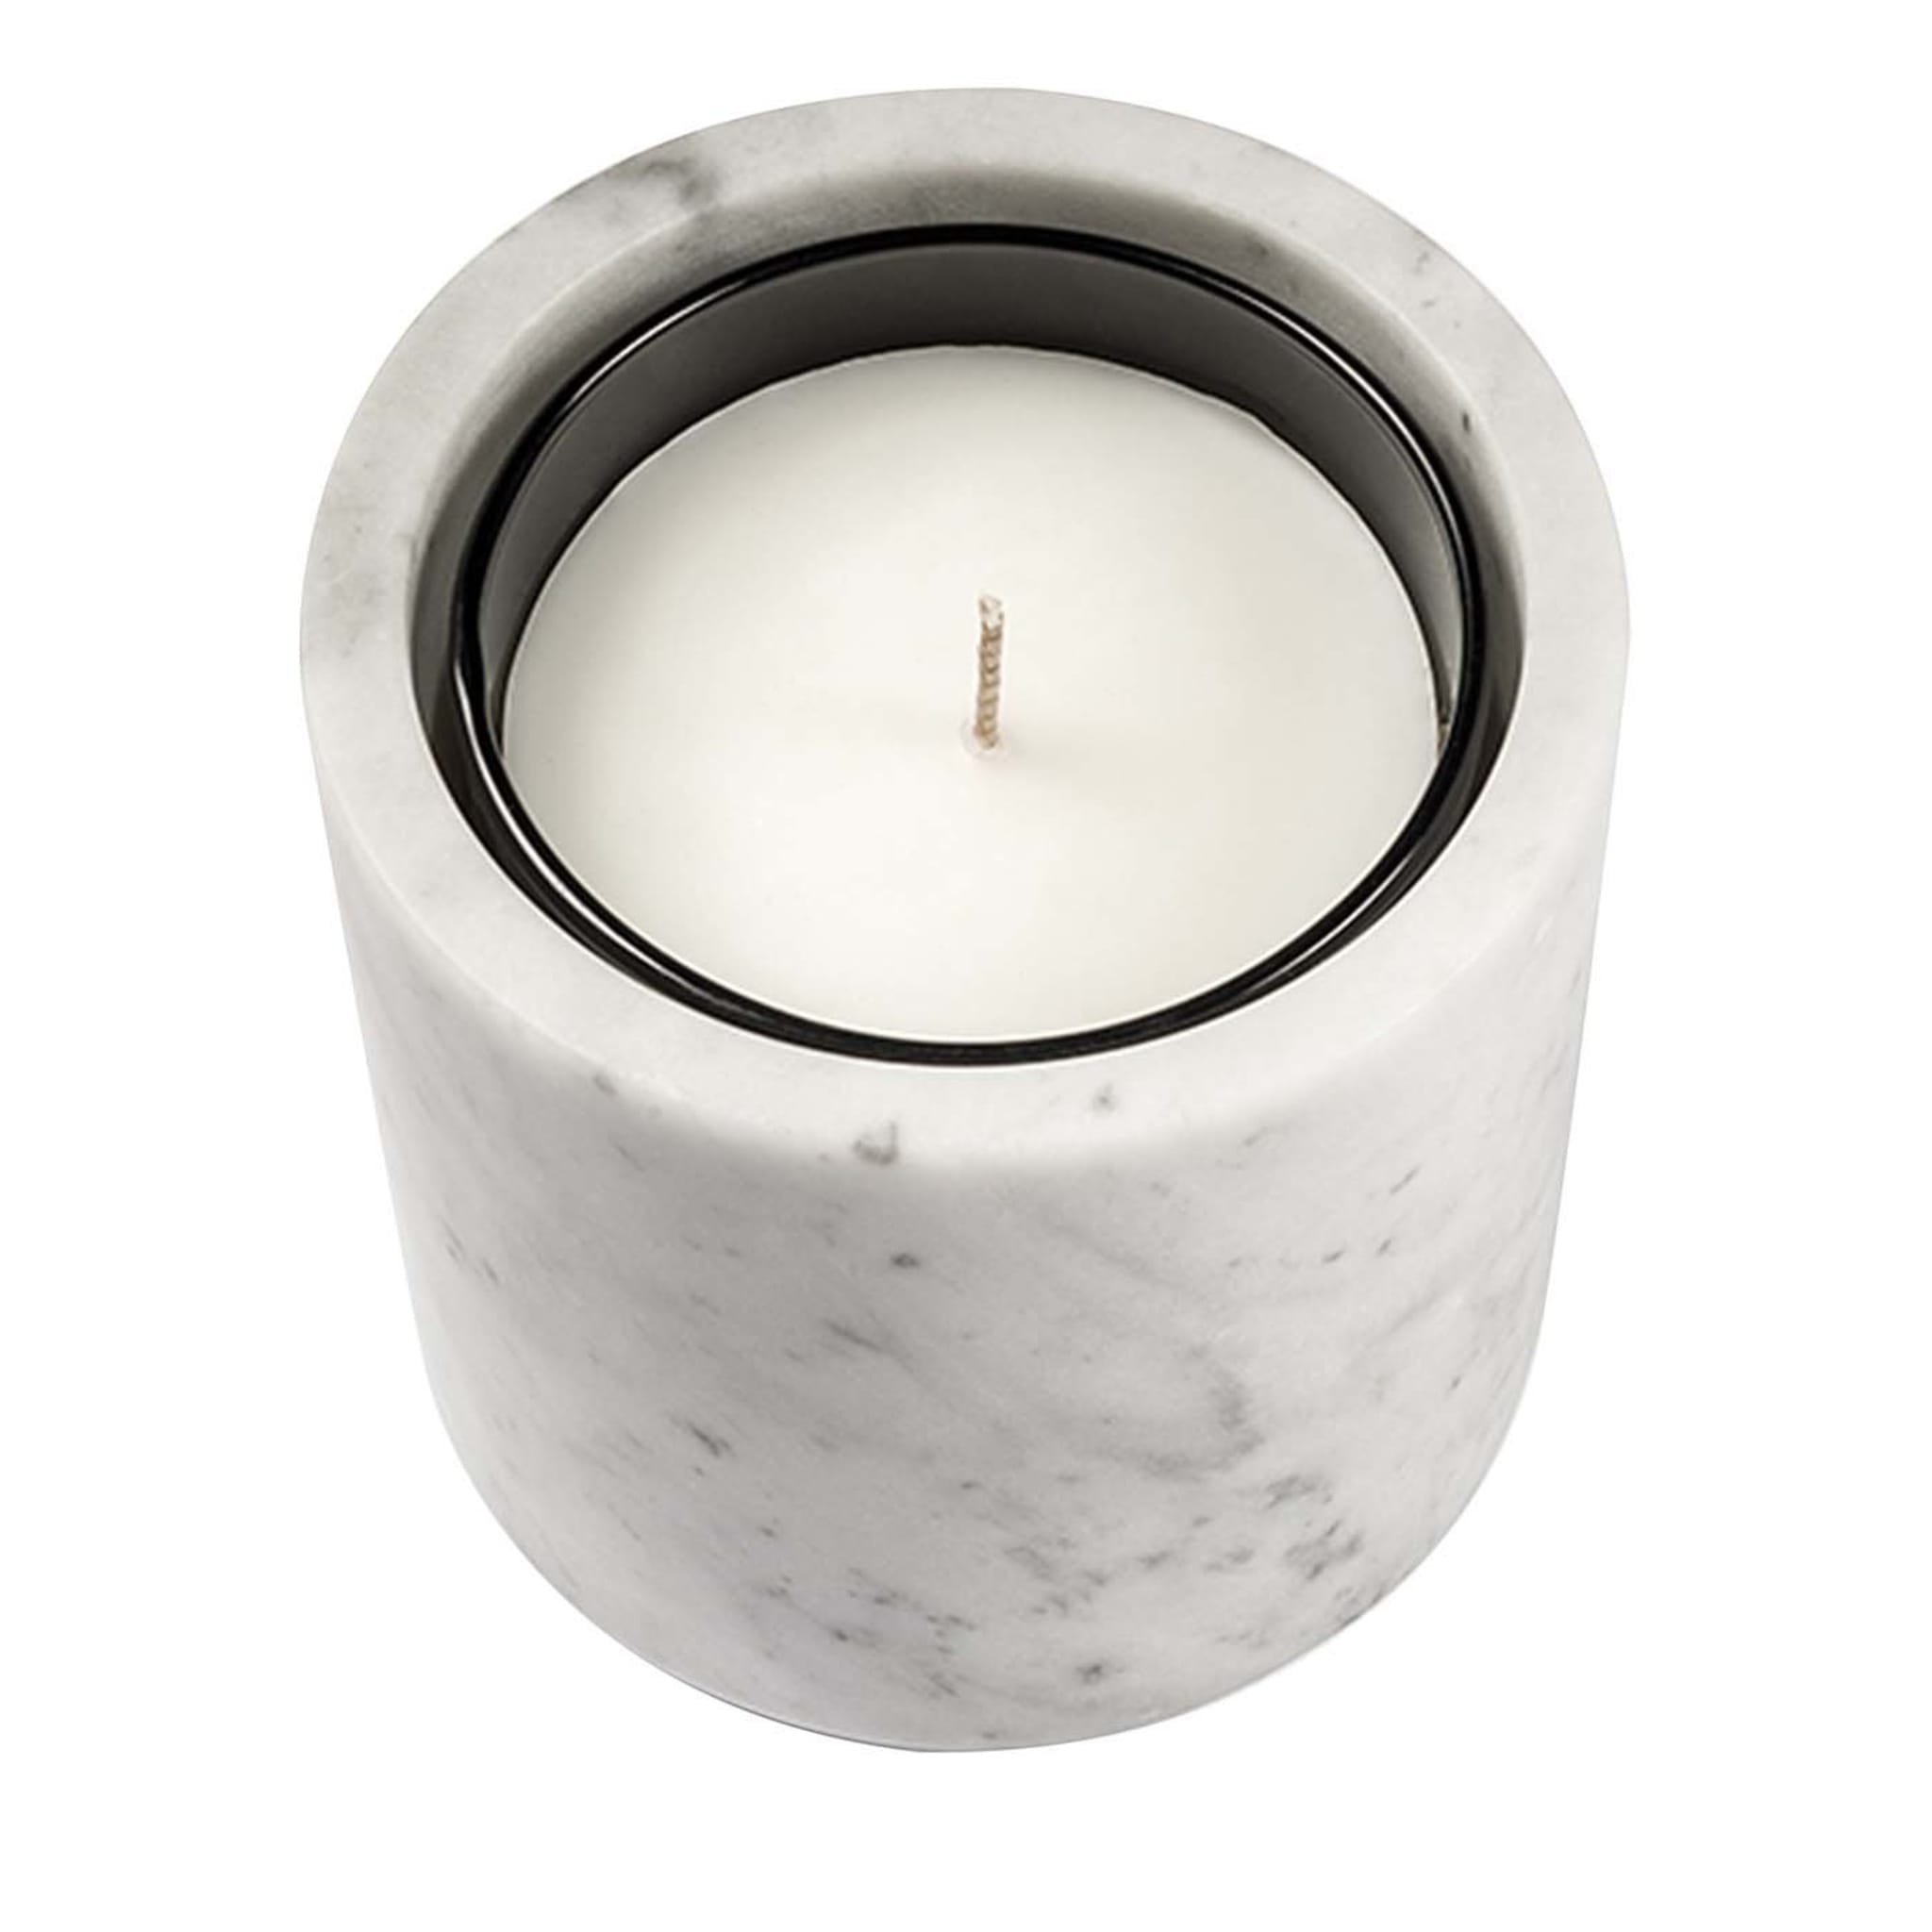 Pietra L11 Candle Holder in Bianco Carrara Marble - Main view